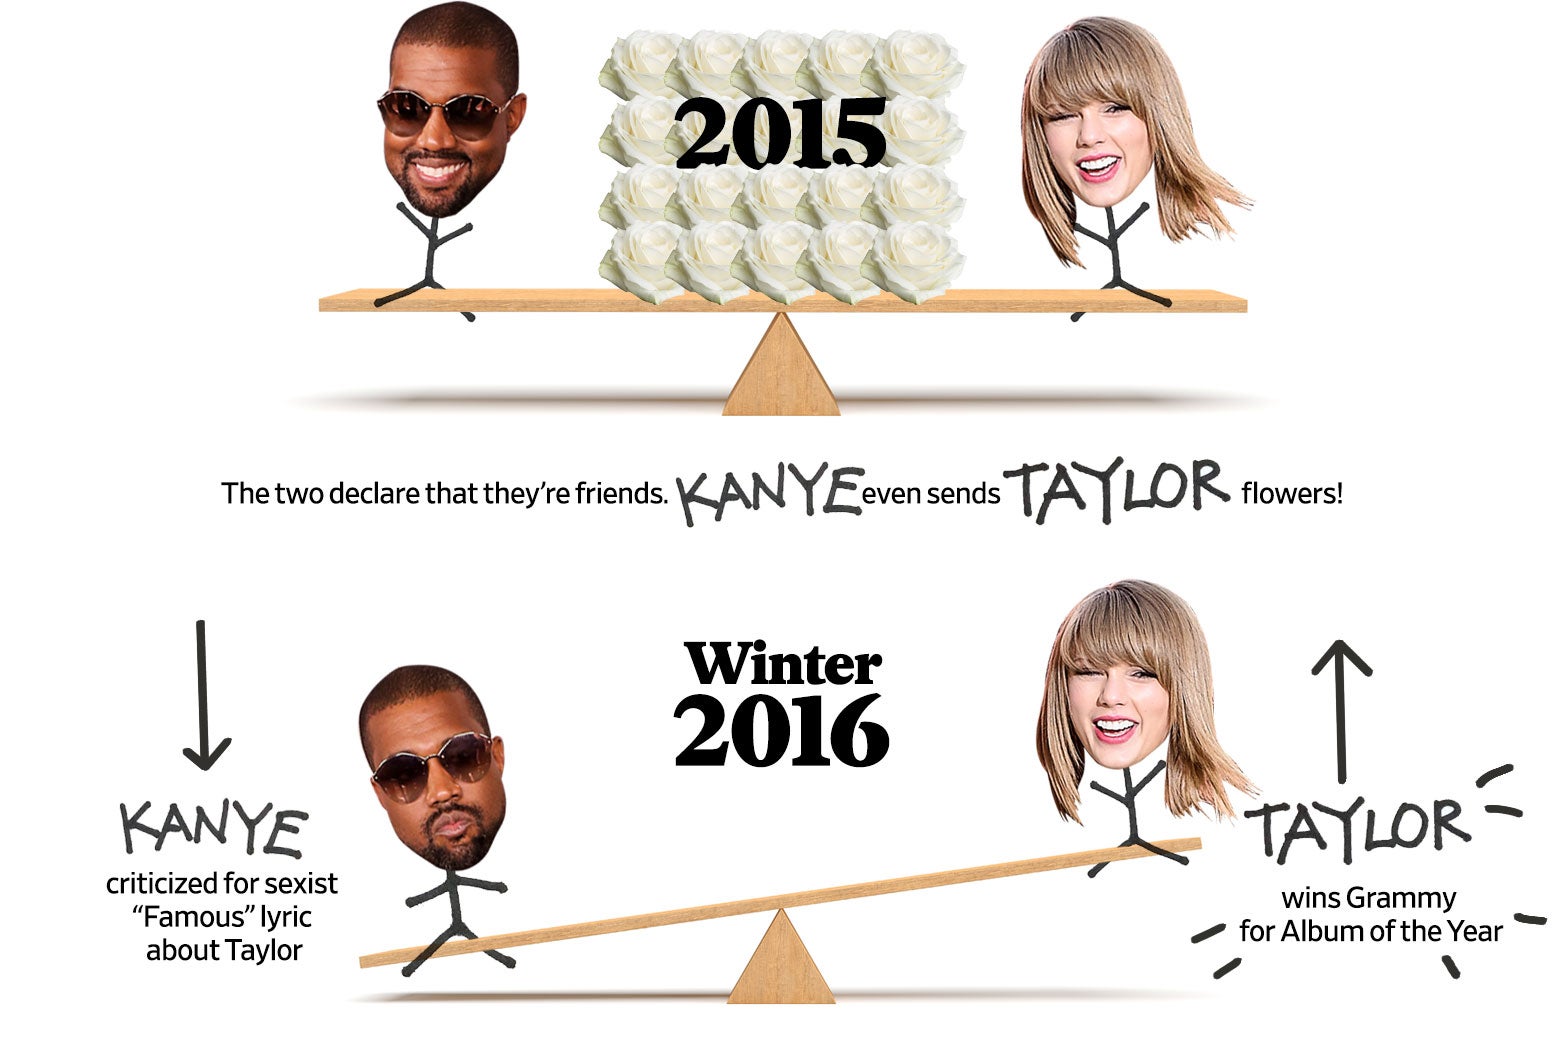 A Timeline of Kanye West and Taylor Swift’s Seesawing Fortunes